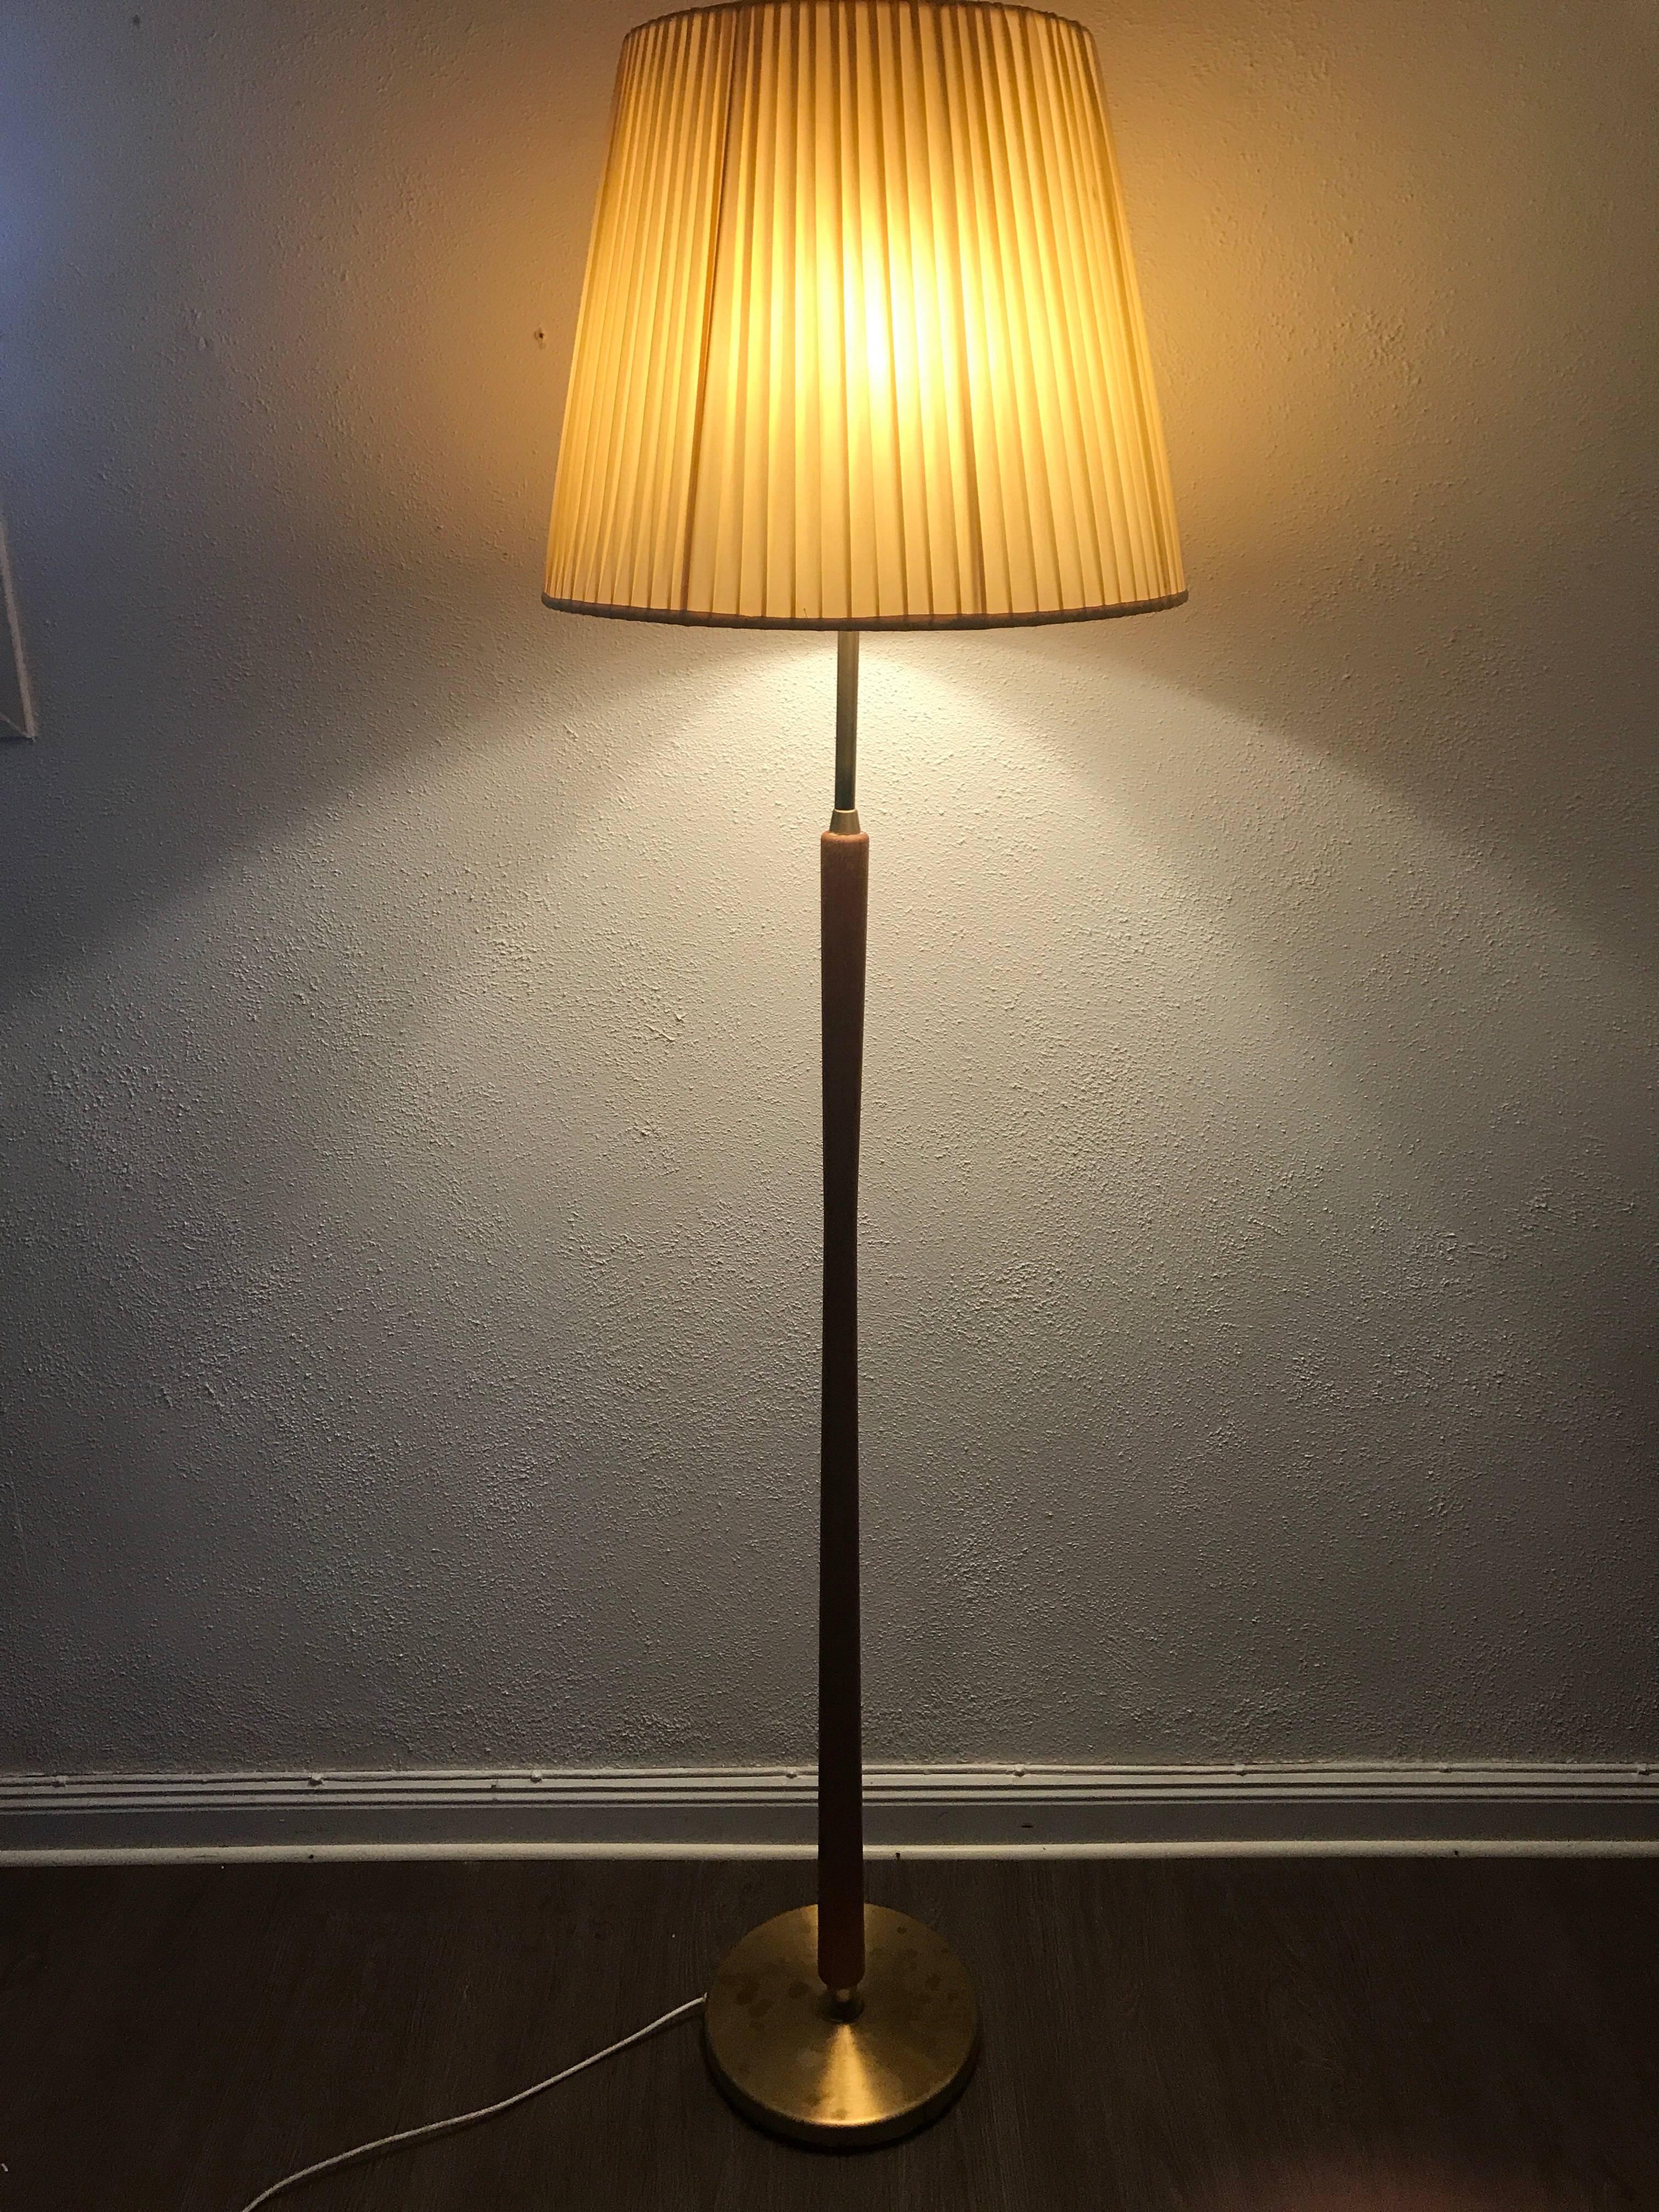 Large Swedish ASEA up and downlight floor lamp by Hans Bergström.
A very large and heavy floor lamp with the unique up and downlight system by ASEA made in the 1950s. The light can be either down, up or both as shown in the pictures. The shade is